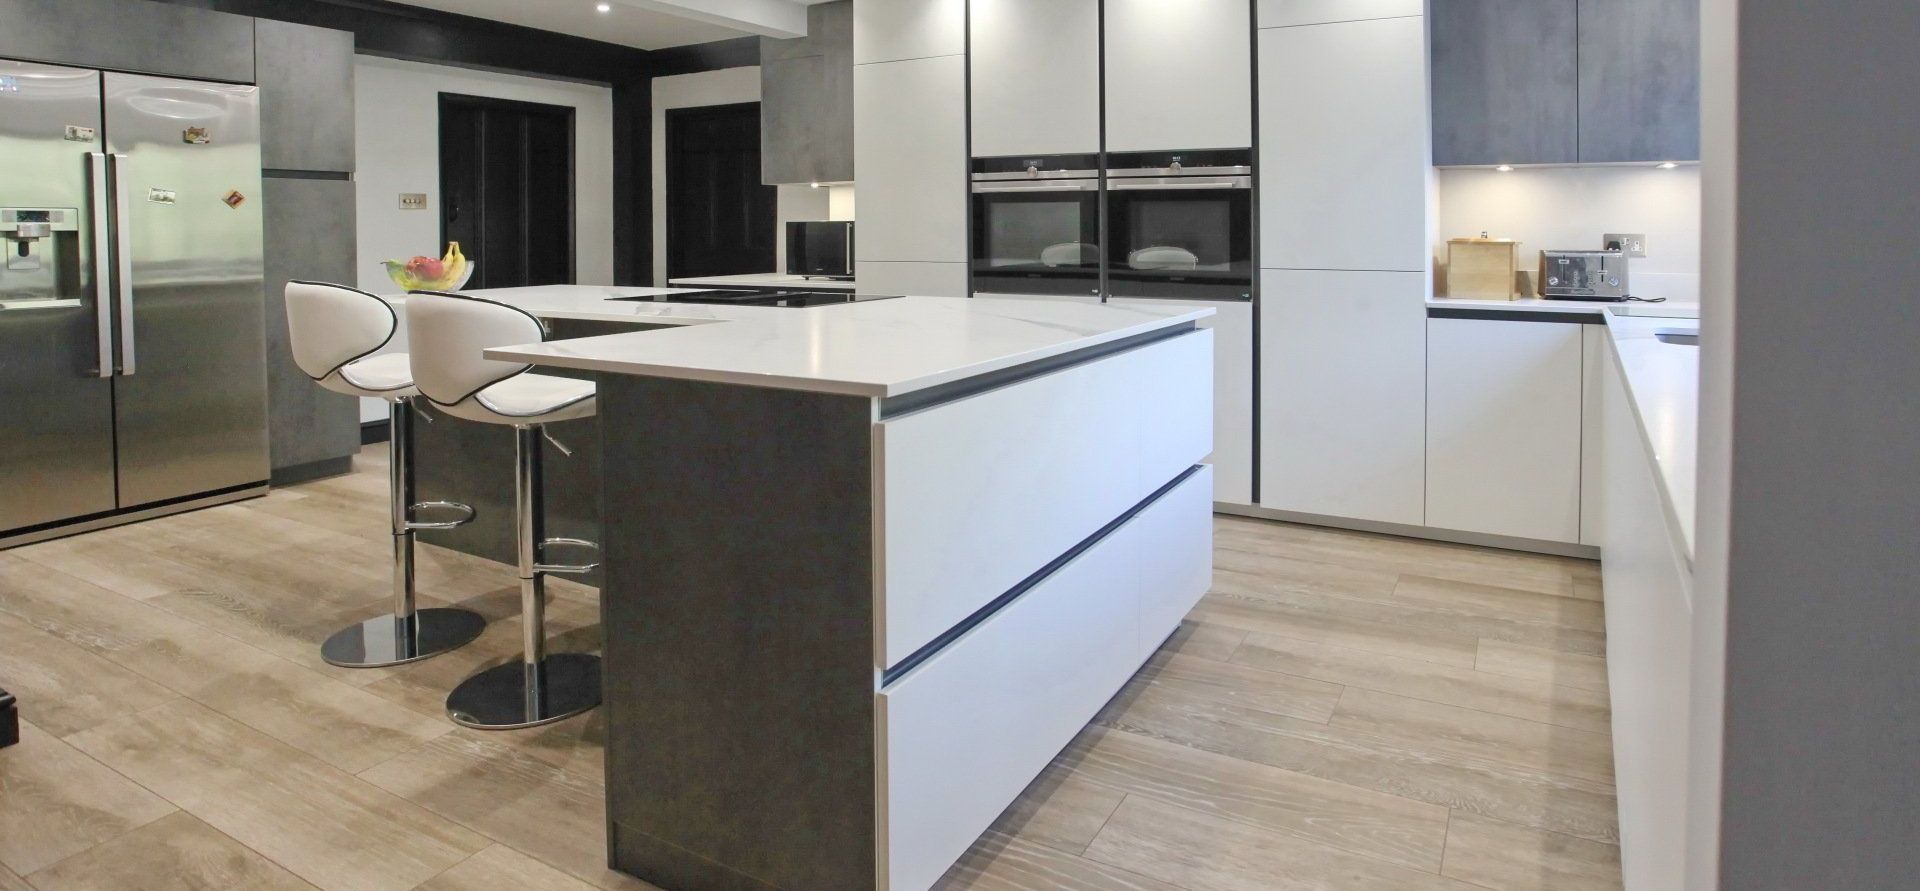 Kitchen island with seating area and a built-in wine fridge by exact by exact